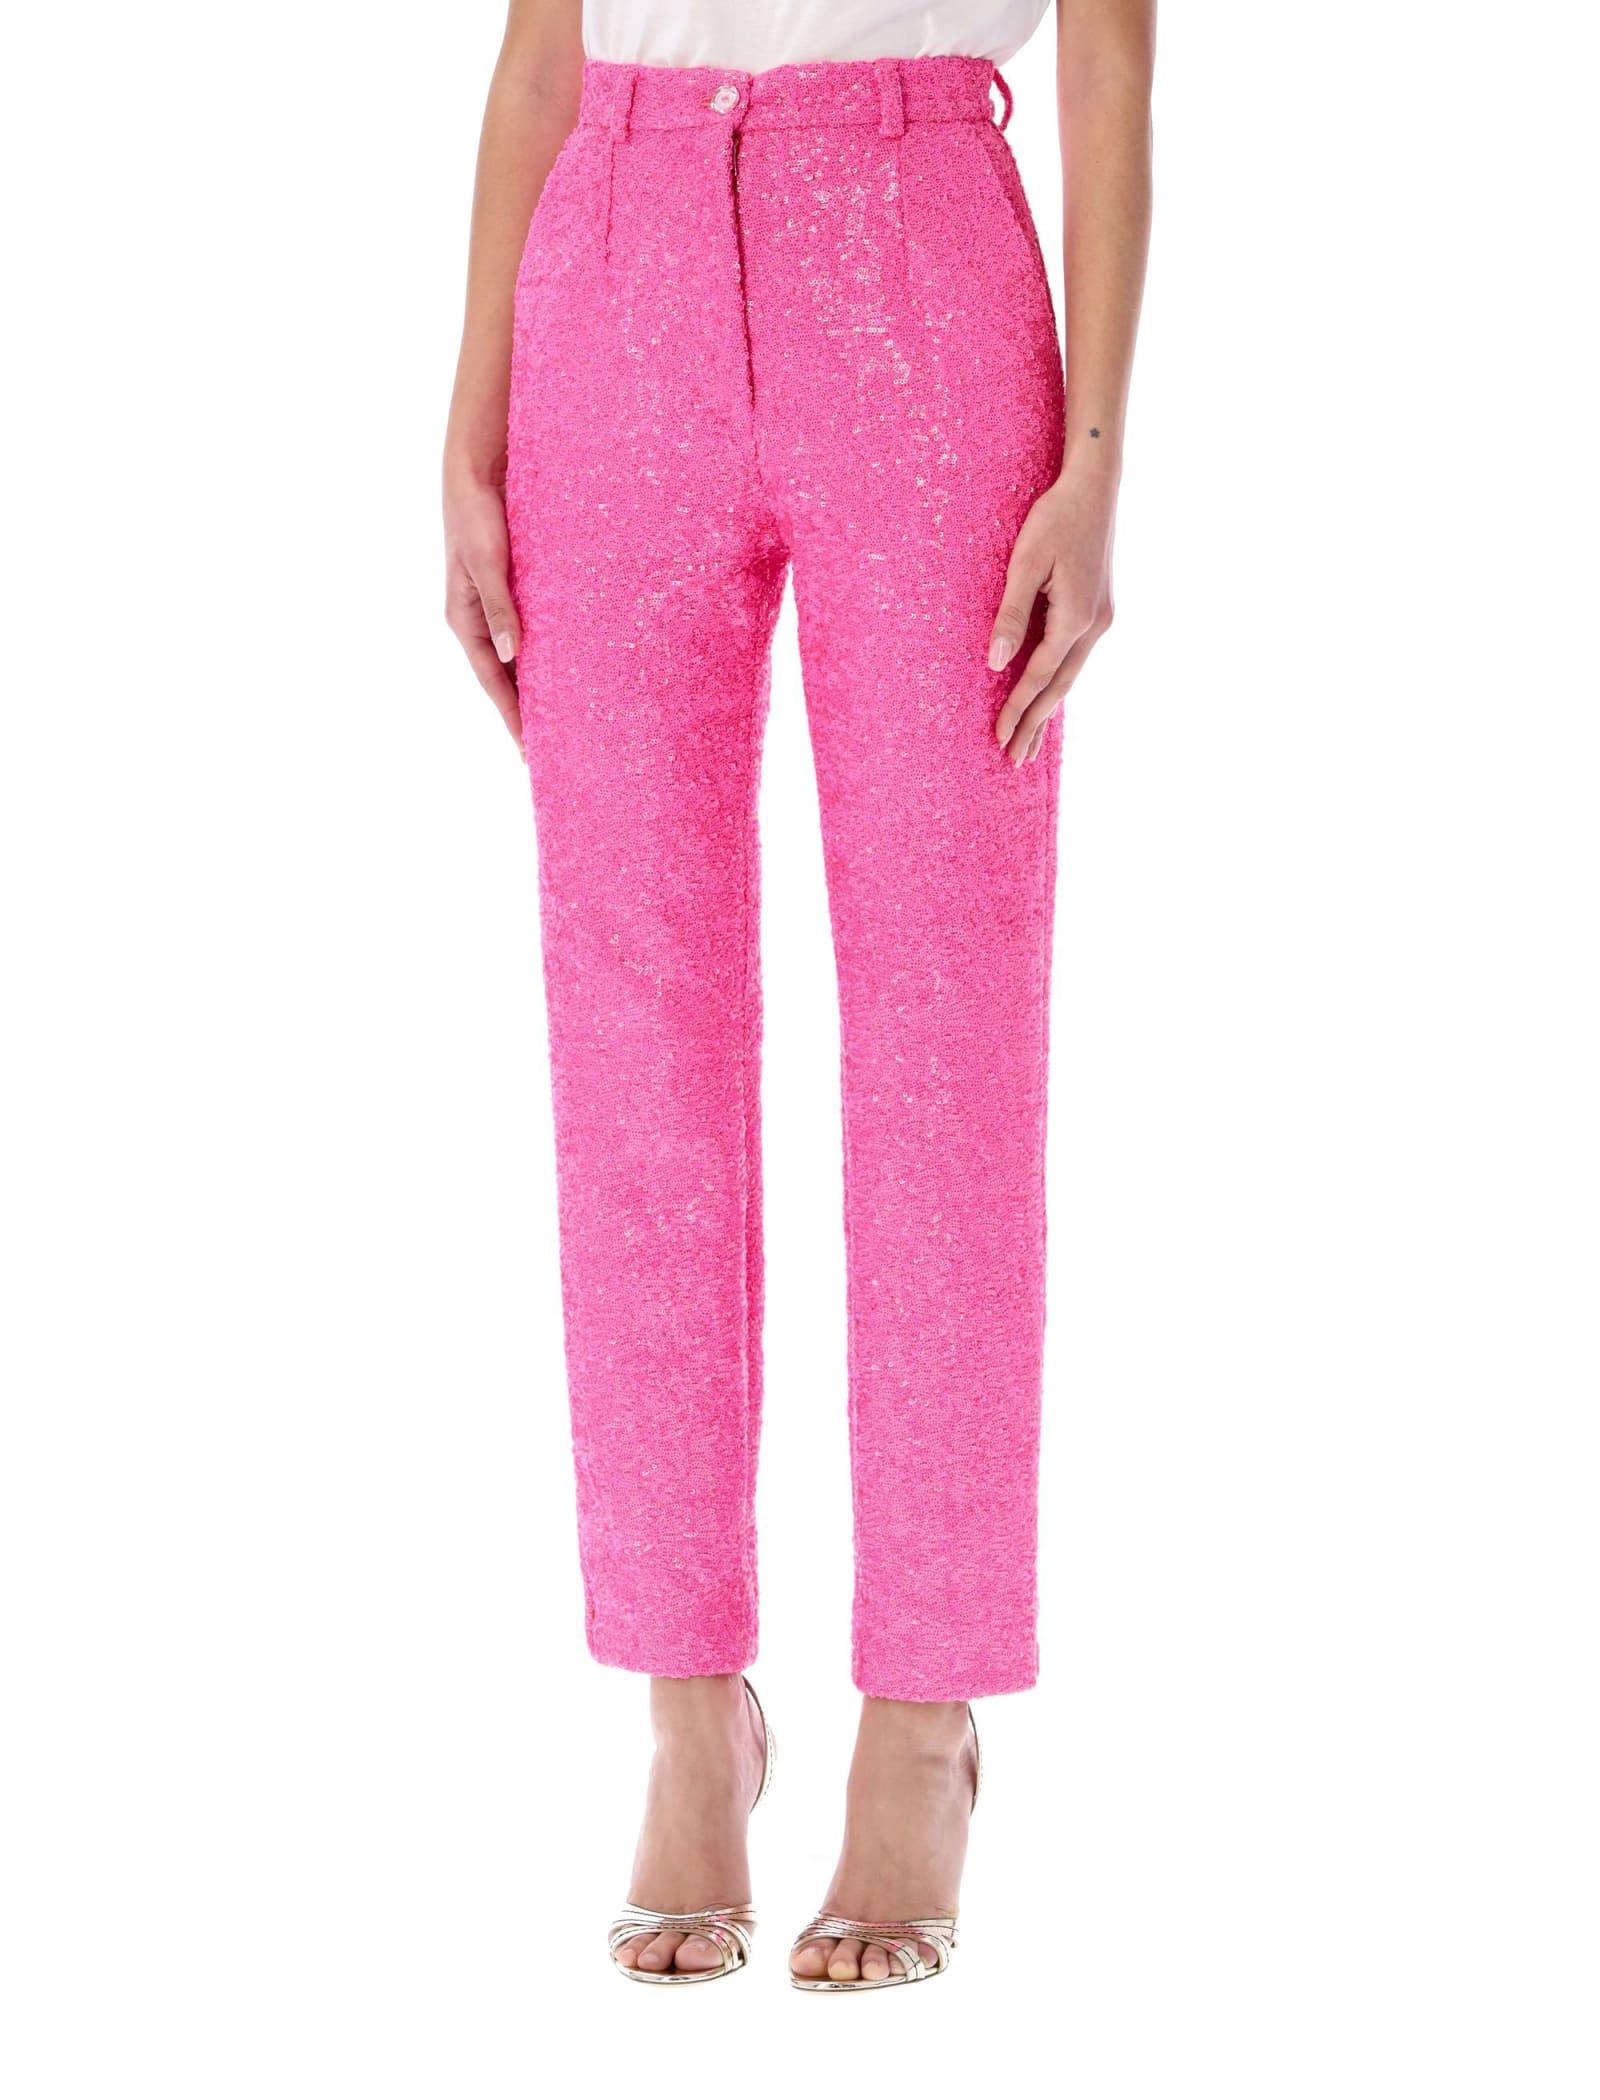 Dolce & Gabbana Sequined Pants in Pink | Lyst